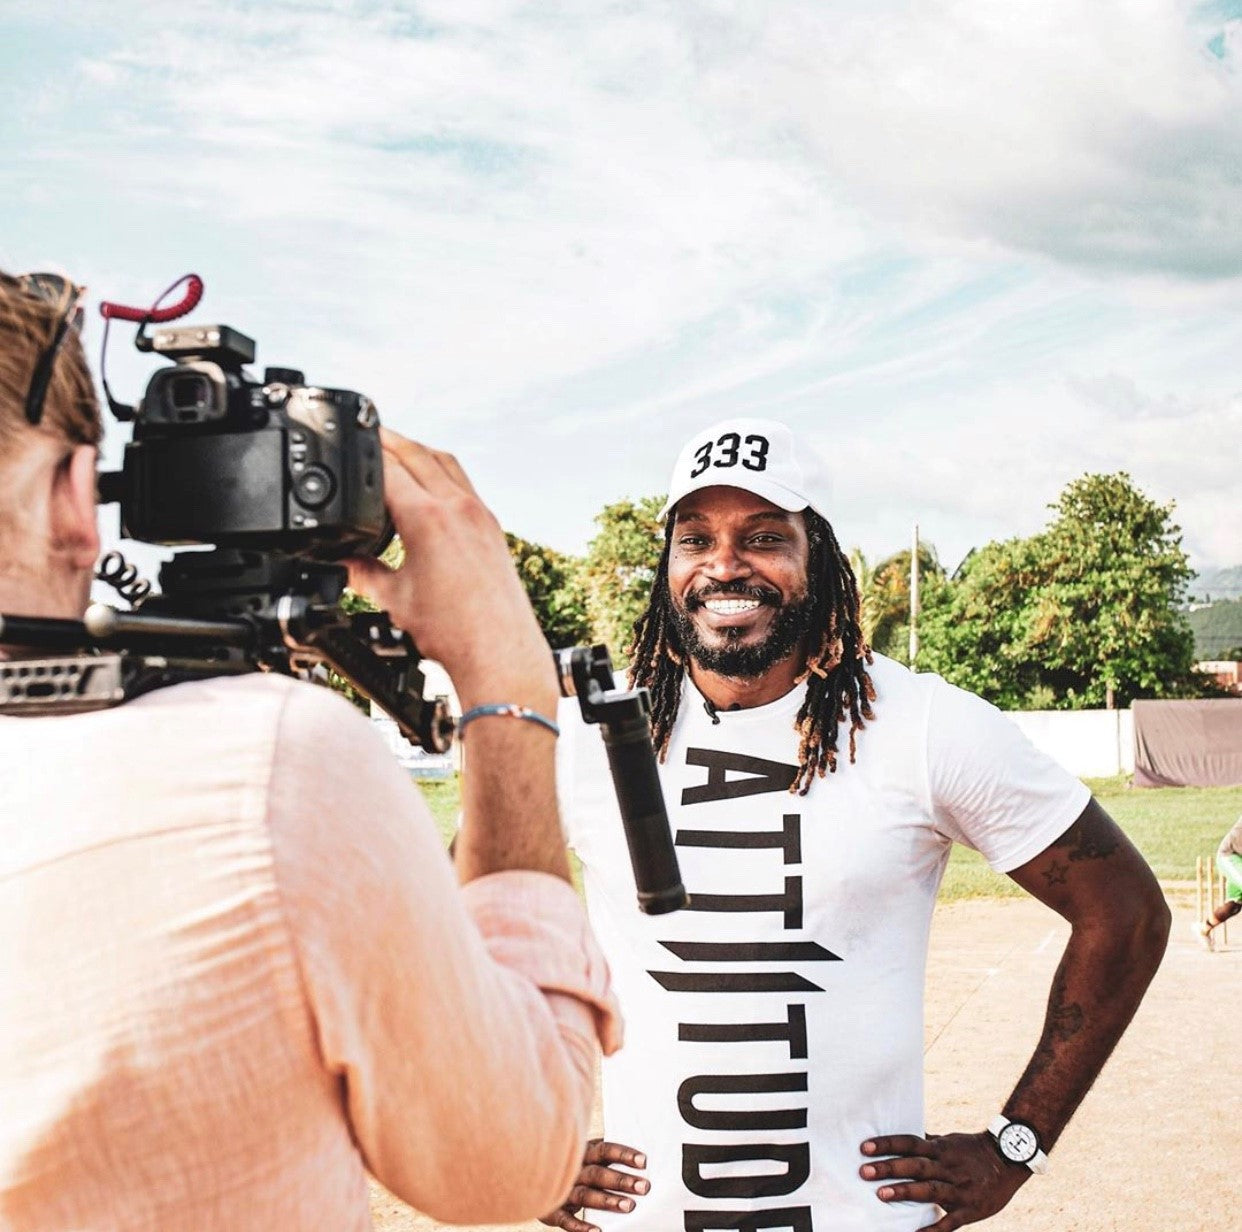 For those of you who don’t know who Chris Gayle is….